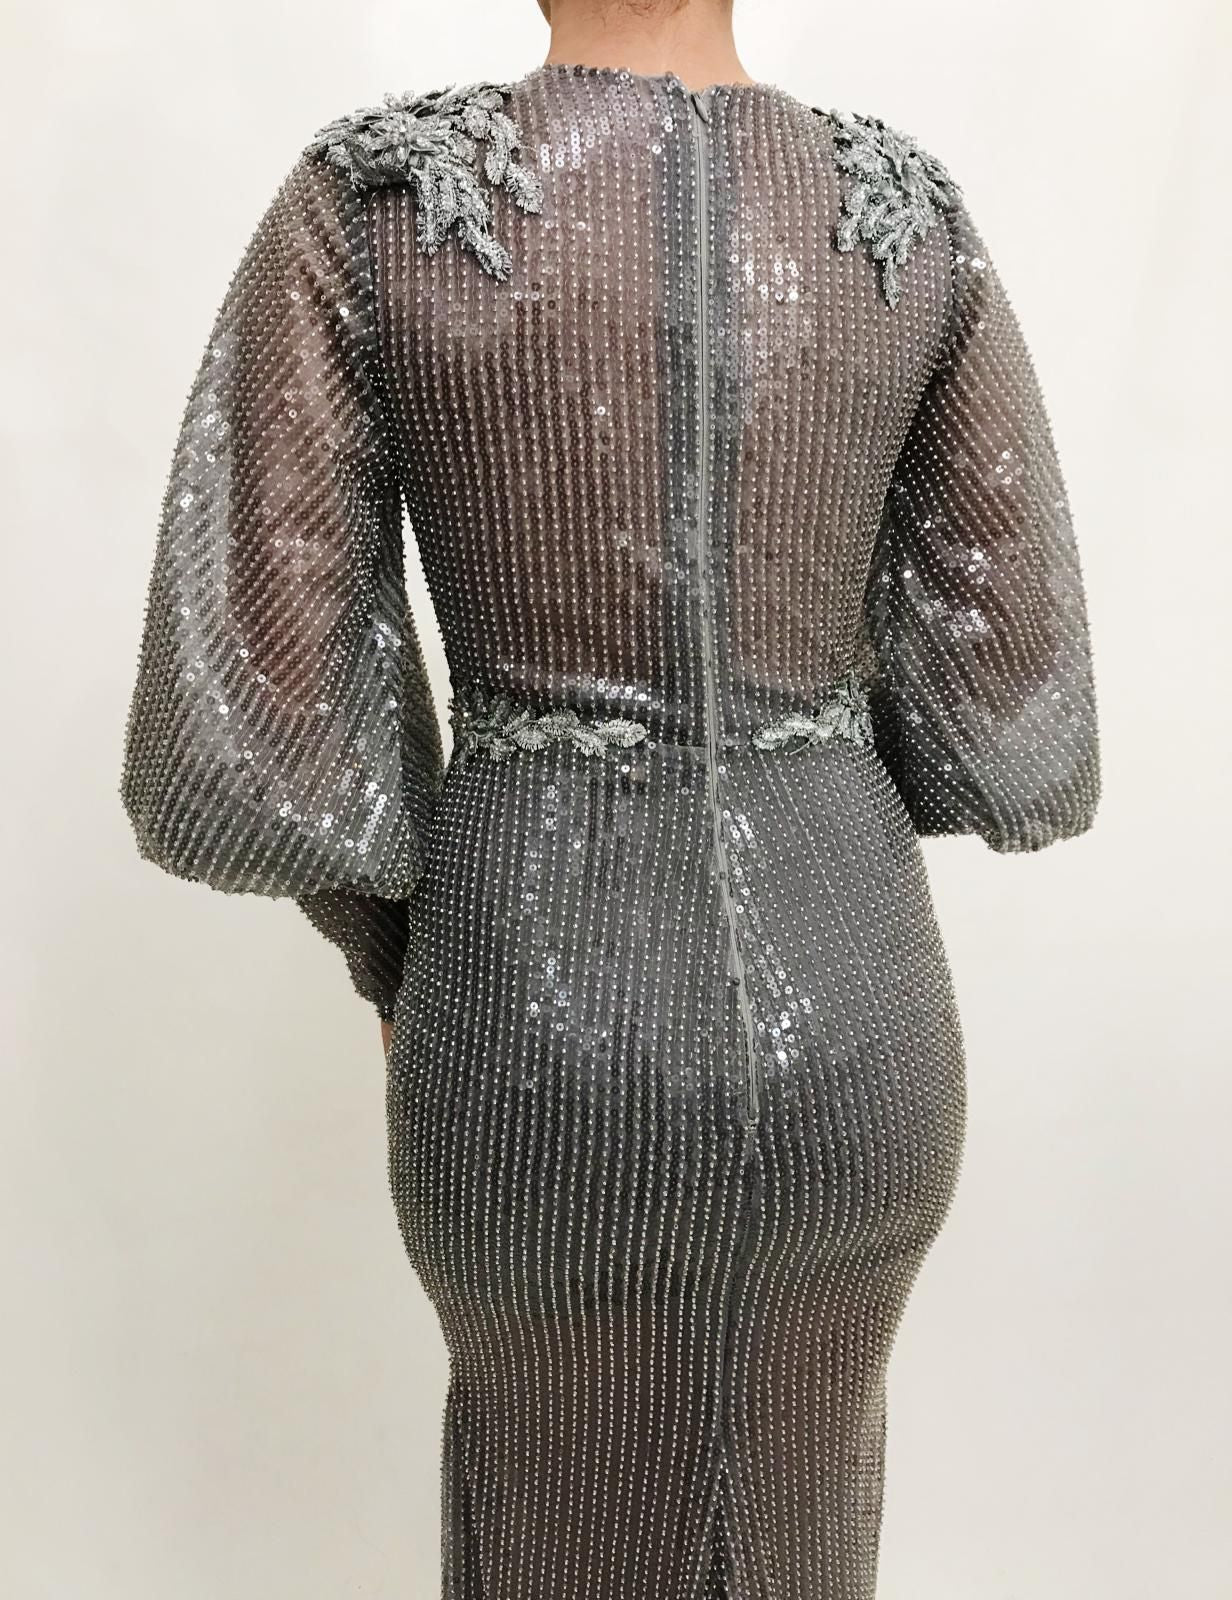 Grey mermaid dress with long sleeves and embroidery